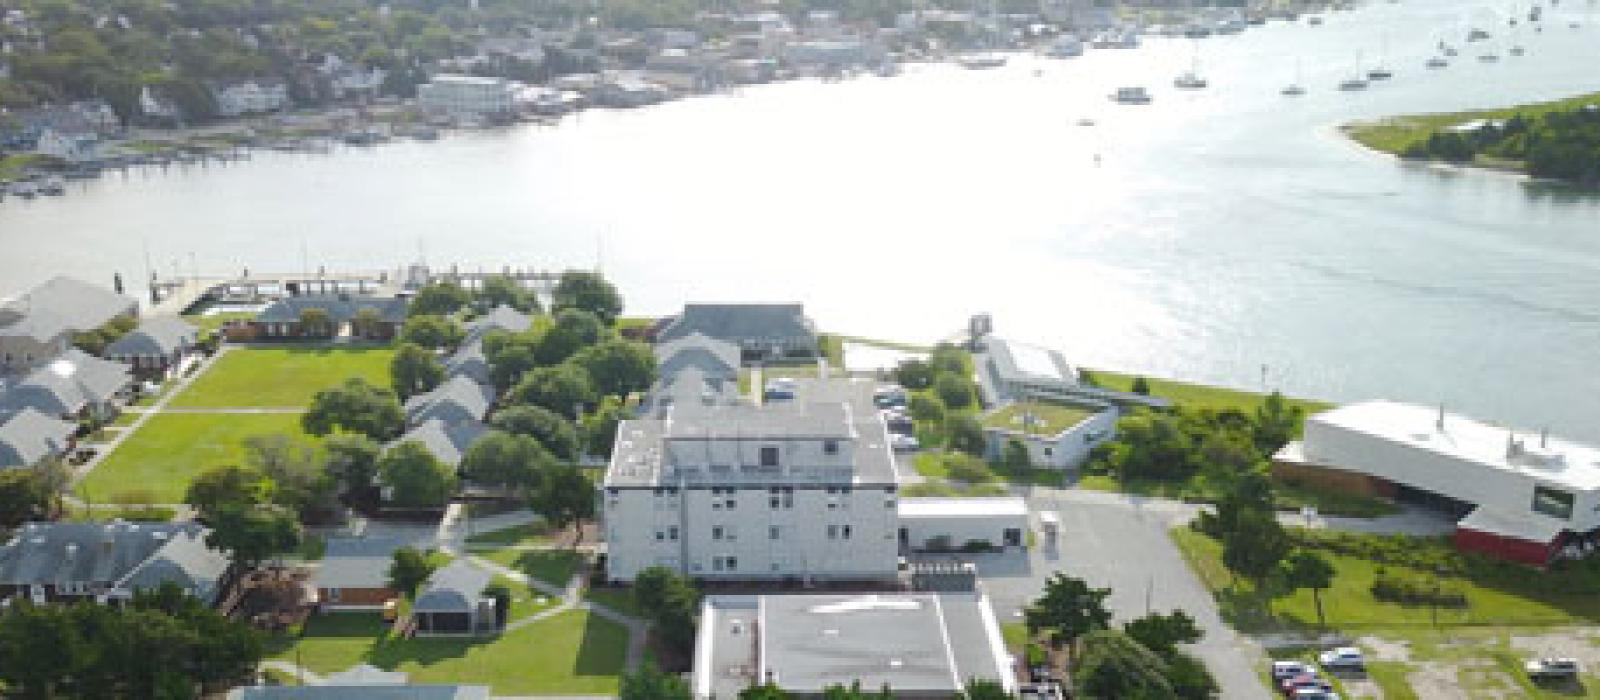 Aerial view of the Marine Lab campus